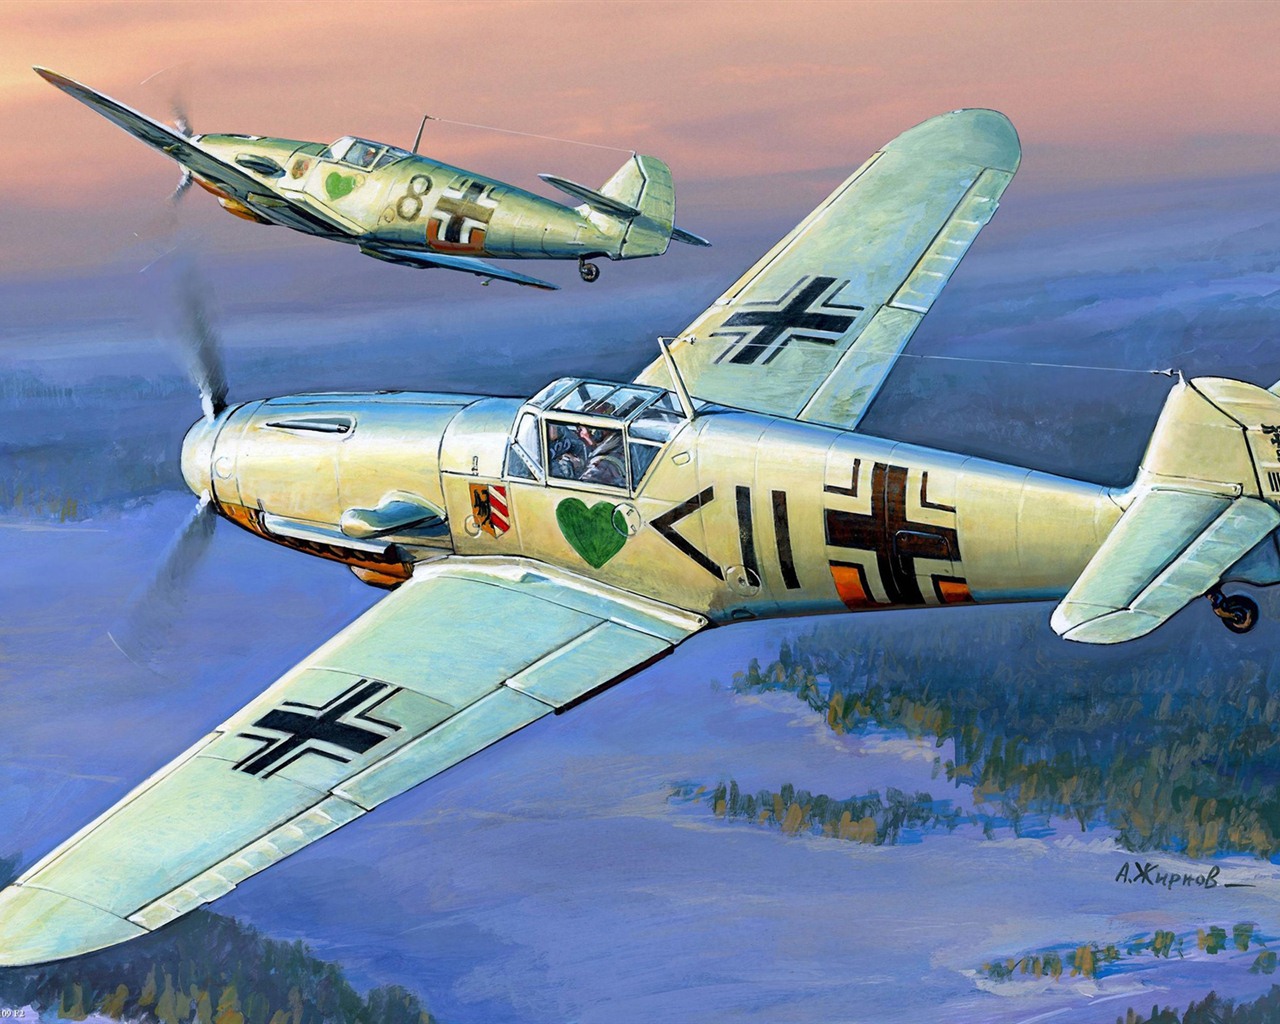 Military aircraft flight exquisite painting wallpapers #12 - 1280x1024